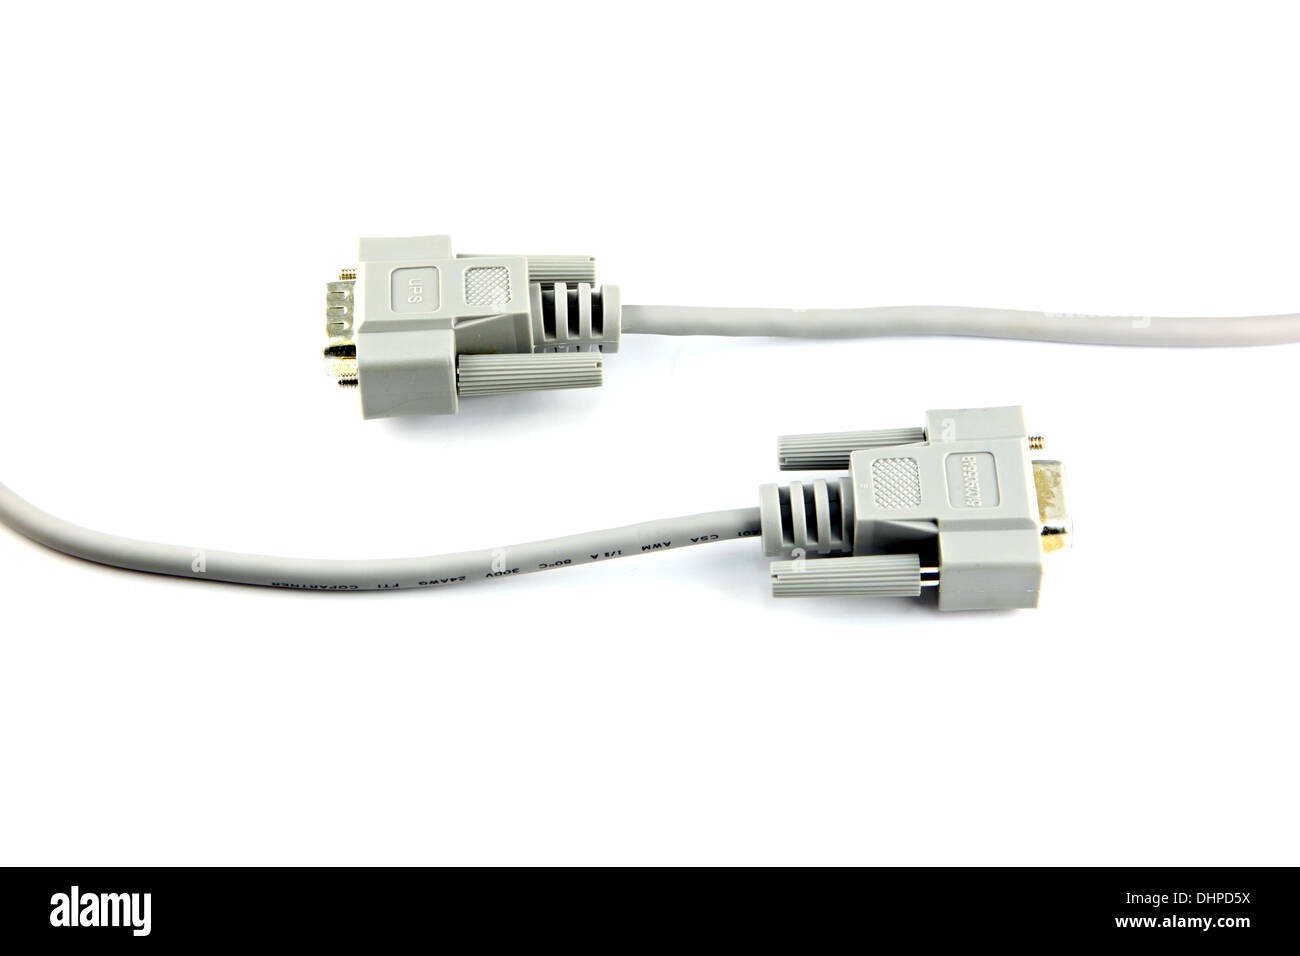 Cable used to connect the Printer on white background. Stock Photo